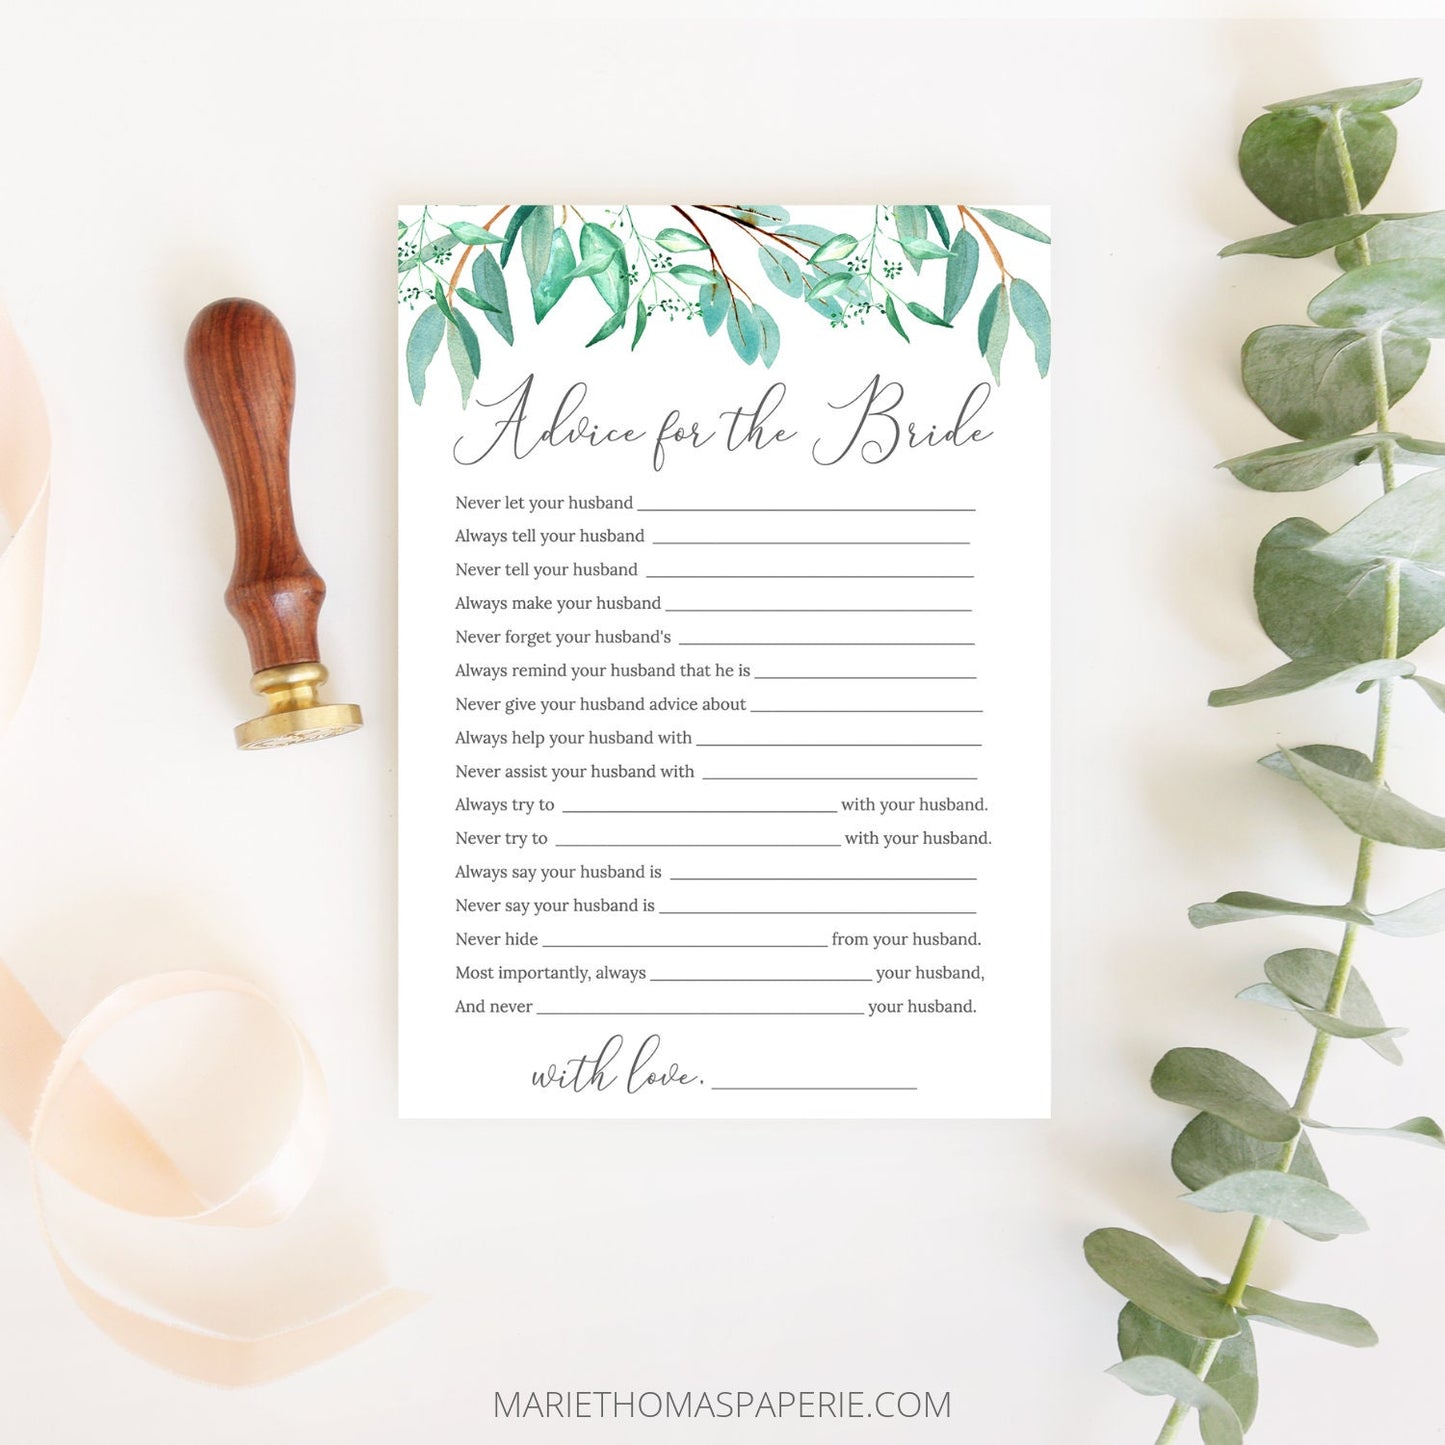 Editable Bridal Shower Games Wedding Advice Cards Advice for the Bride Greenery Template